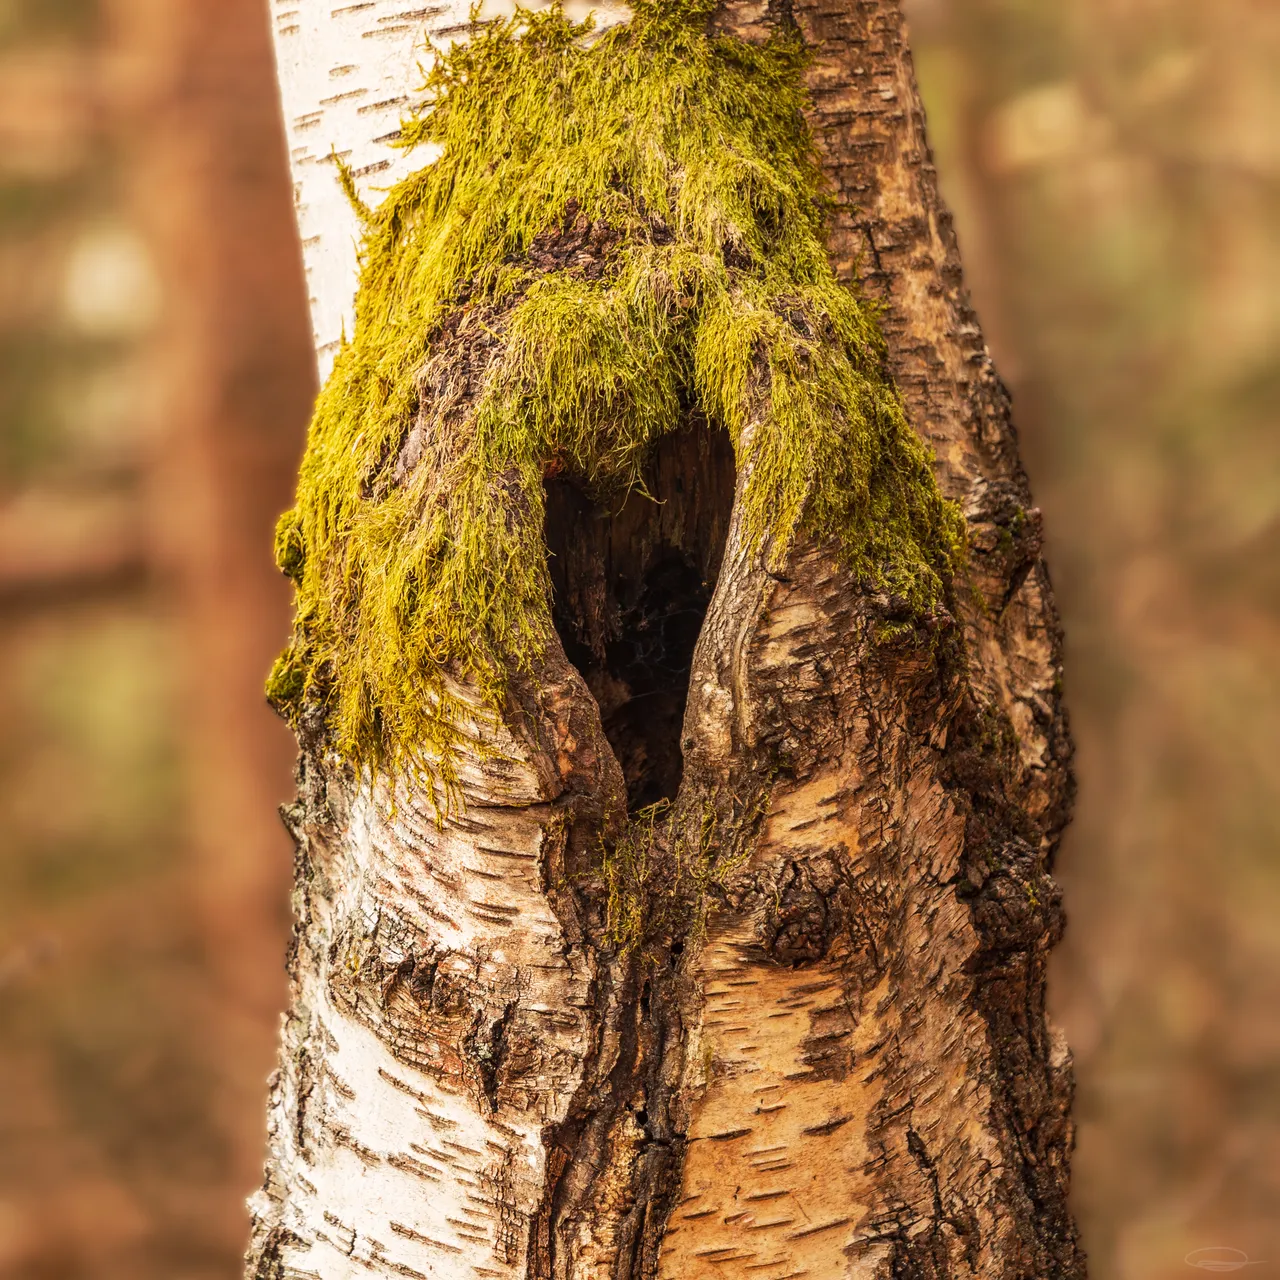 Lake Forstsee: Birch tree with heart-shaped knothole